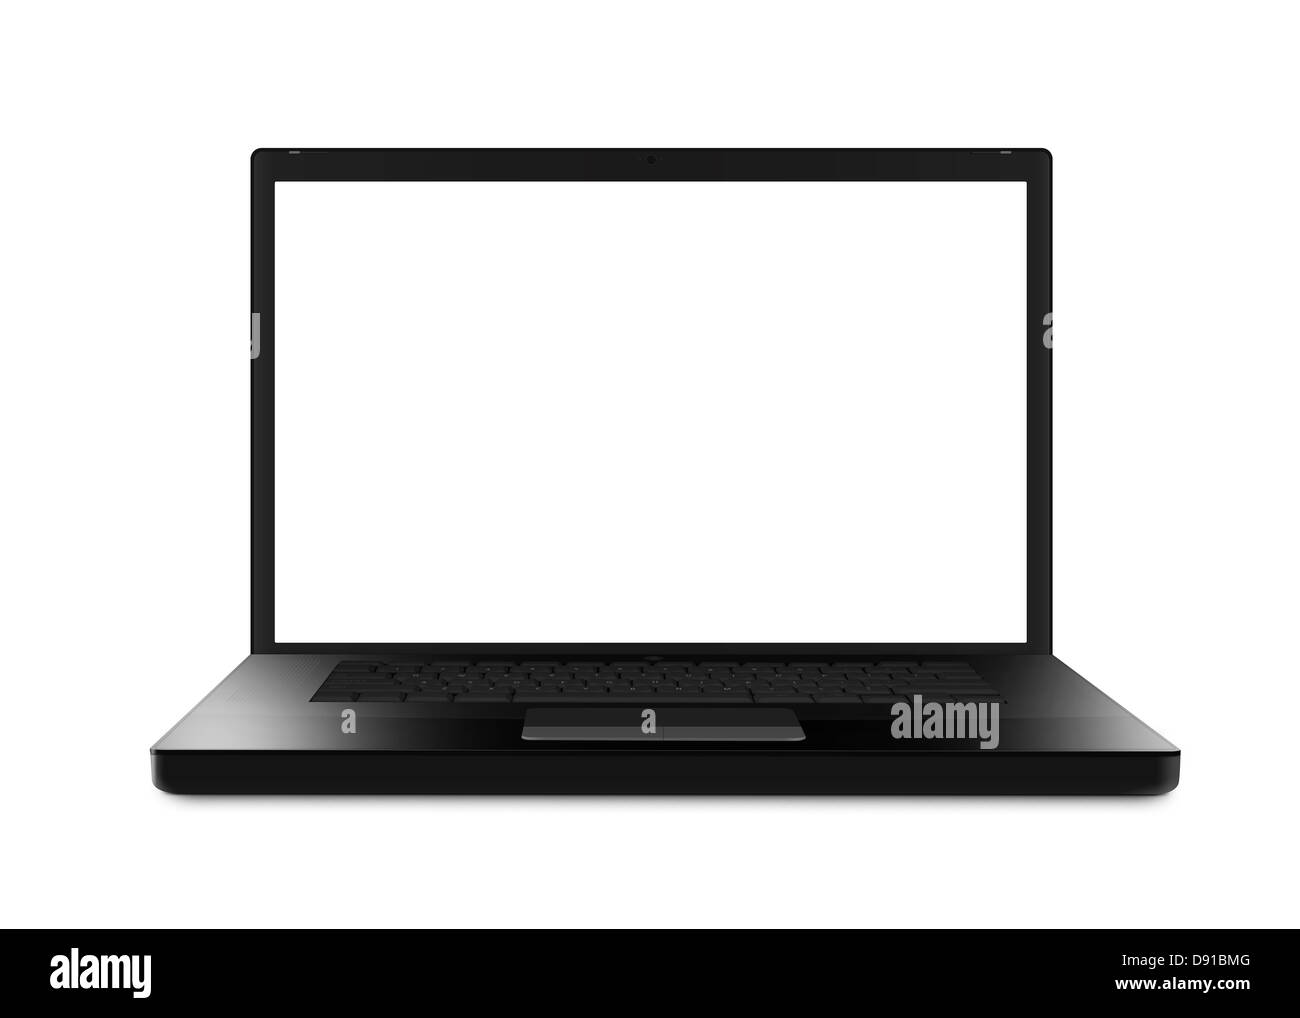 Black Laptop computer with clipping path. Isolated with a white screen on white background. Stock Photo